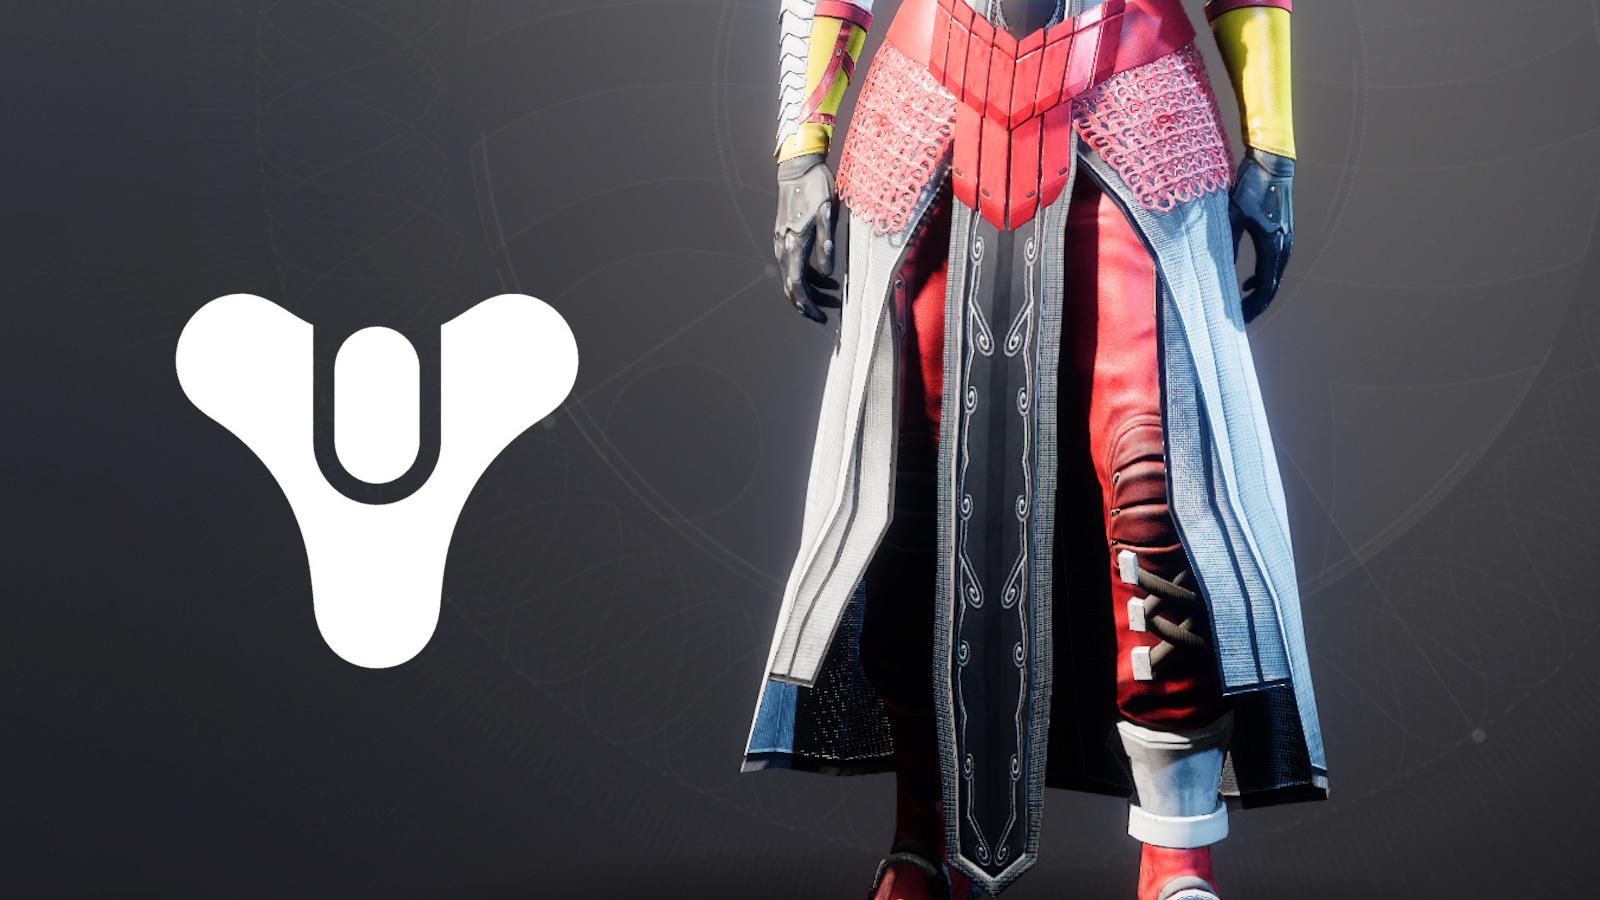 Warlock Philomath Robes with Up for Grabs Shader applied in Destiny 2.